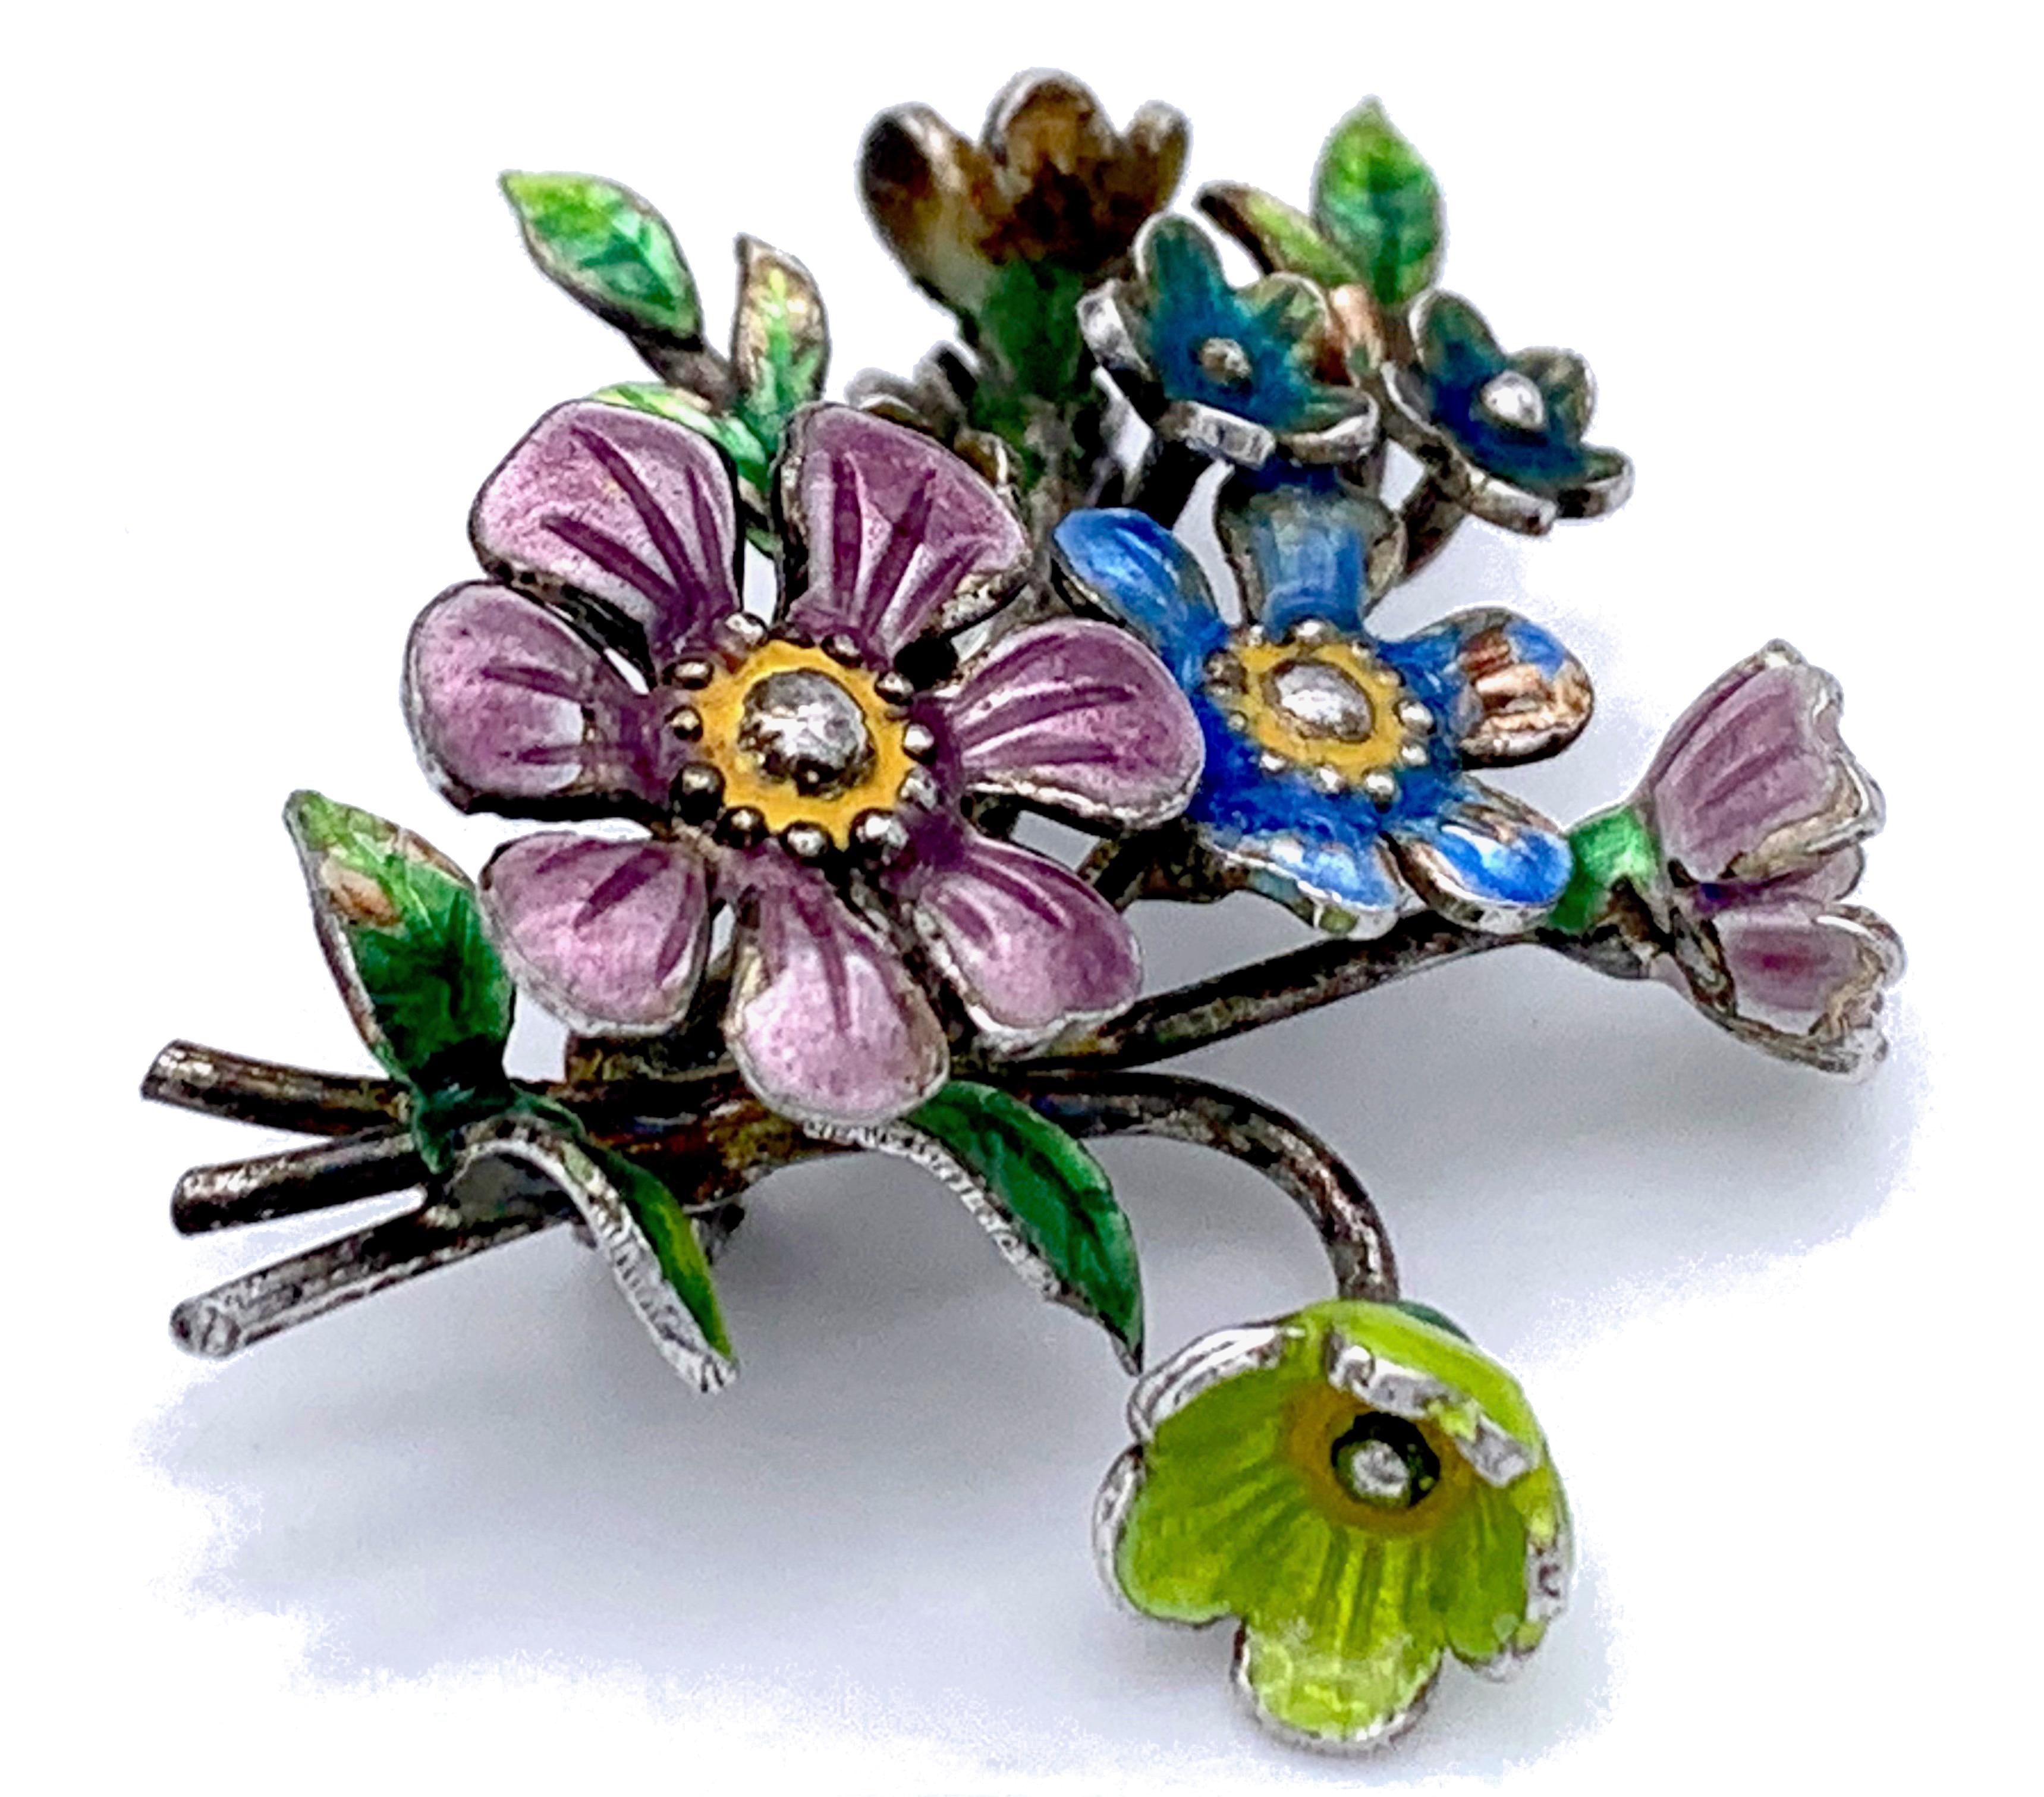 This delicate, beautiflul and colourful brooch in the shape of a flower bouquet will add spring feelings to any outfit.  Contemporary work by Munich master goldsmith Günther Hahn.